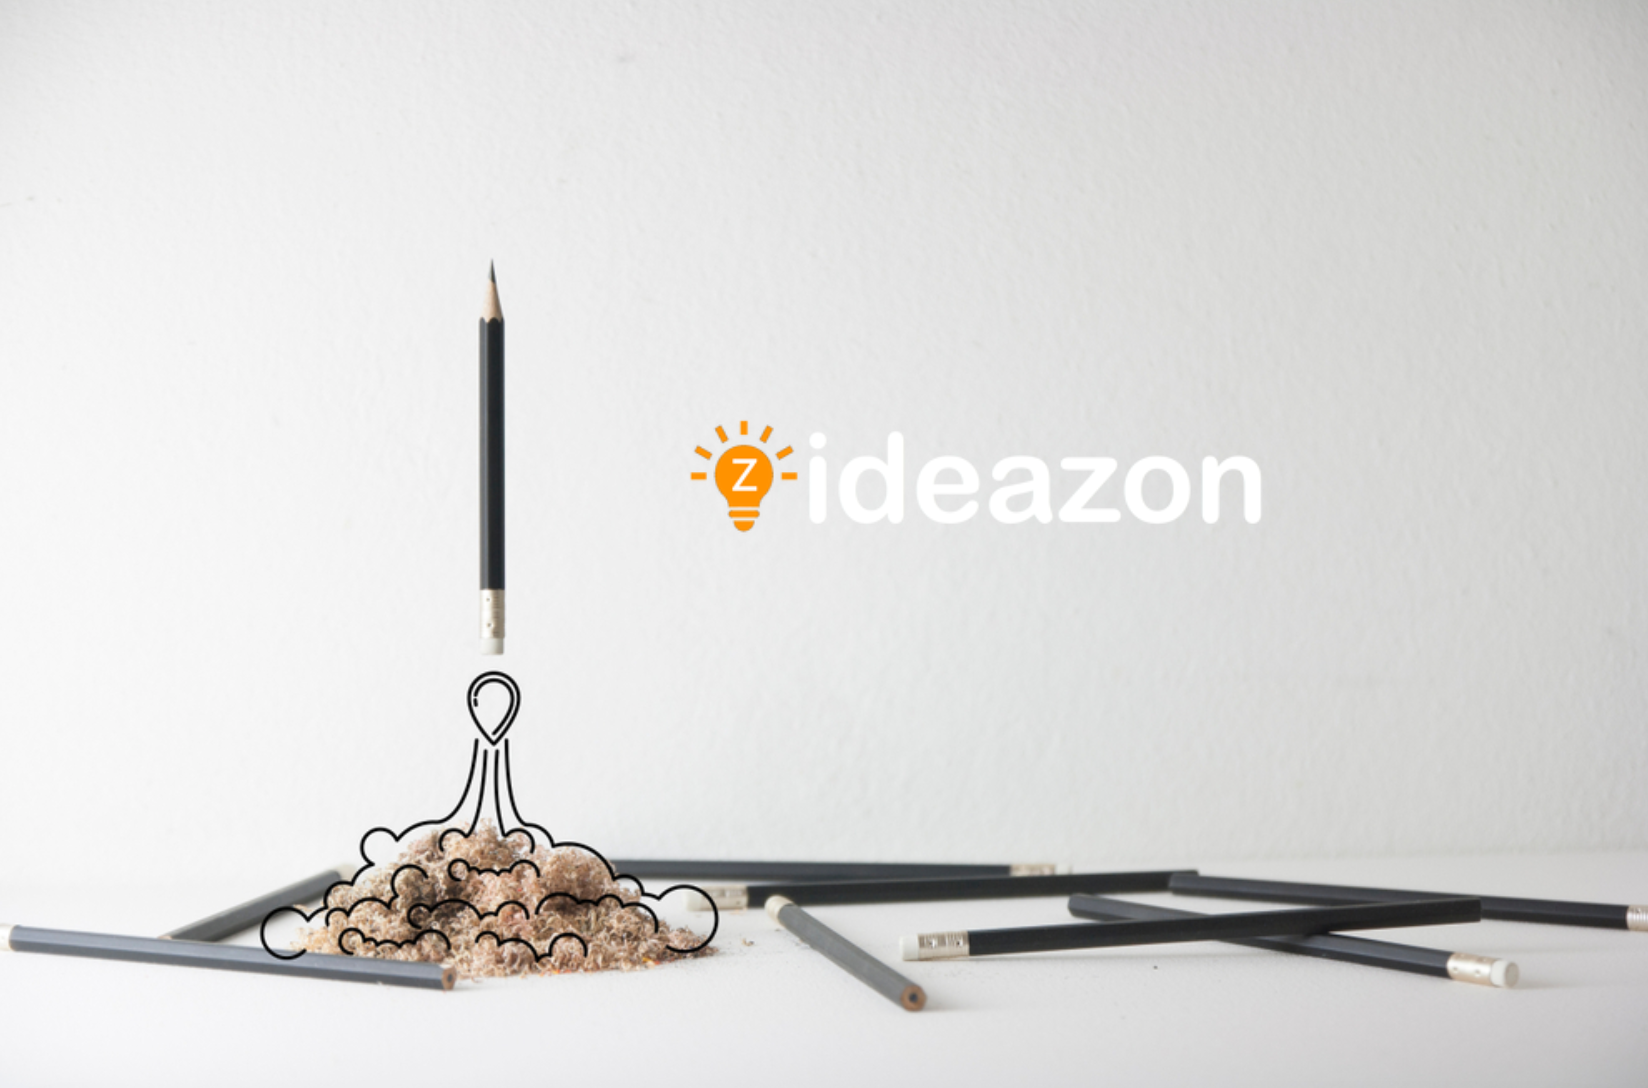 Ideazon Shares How The Crowdfunding Landscape Has Changed